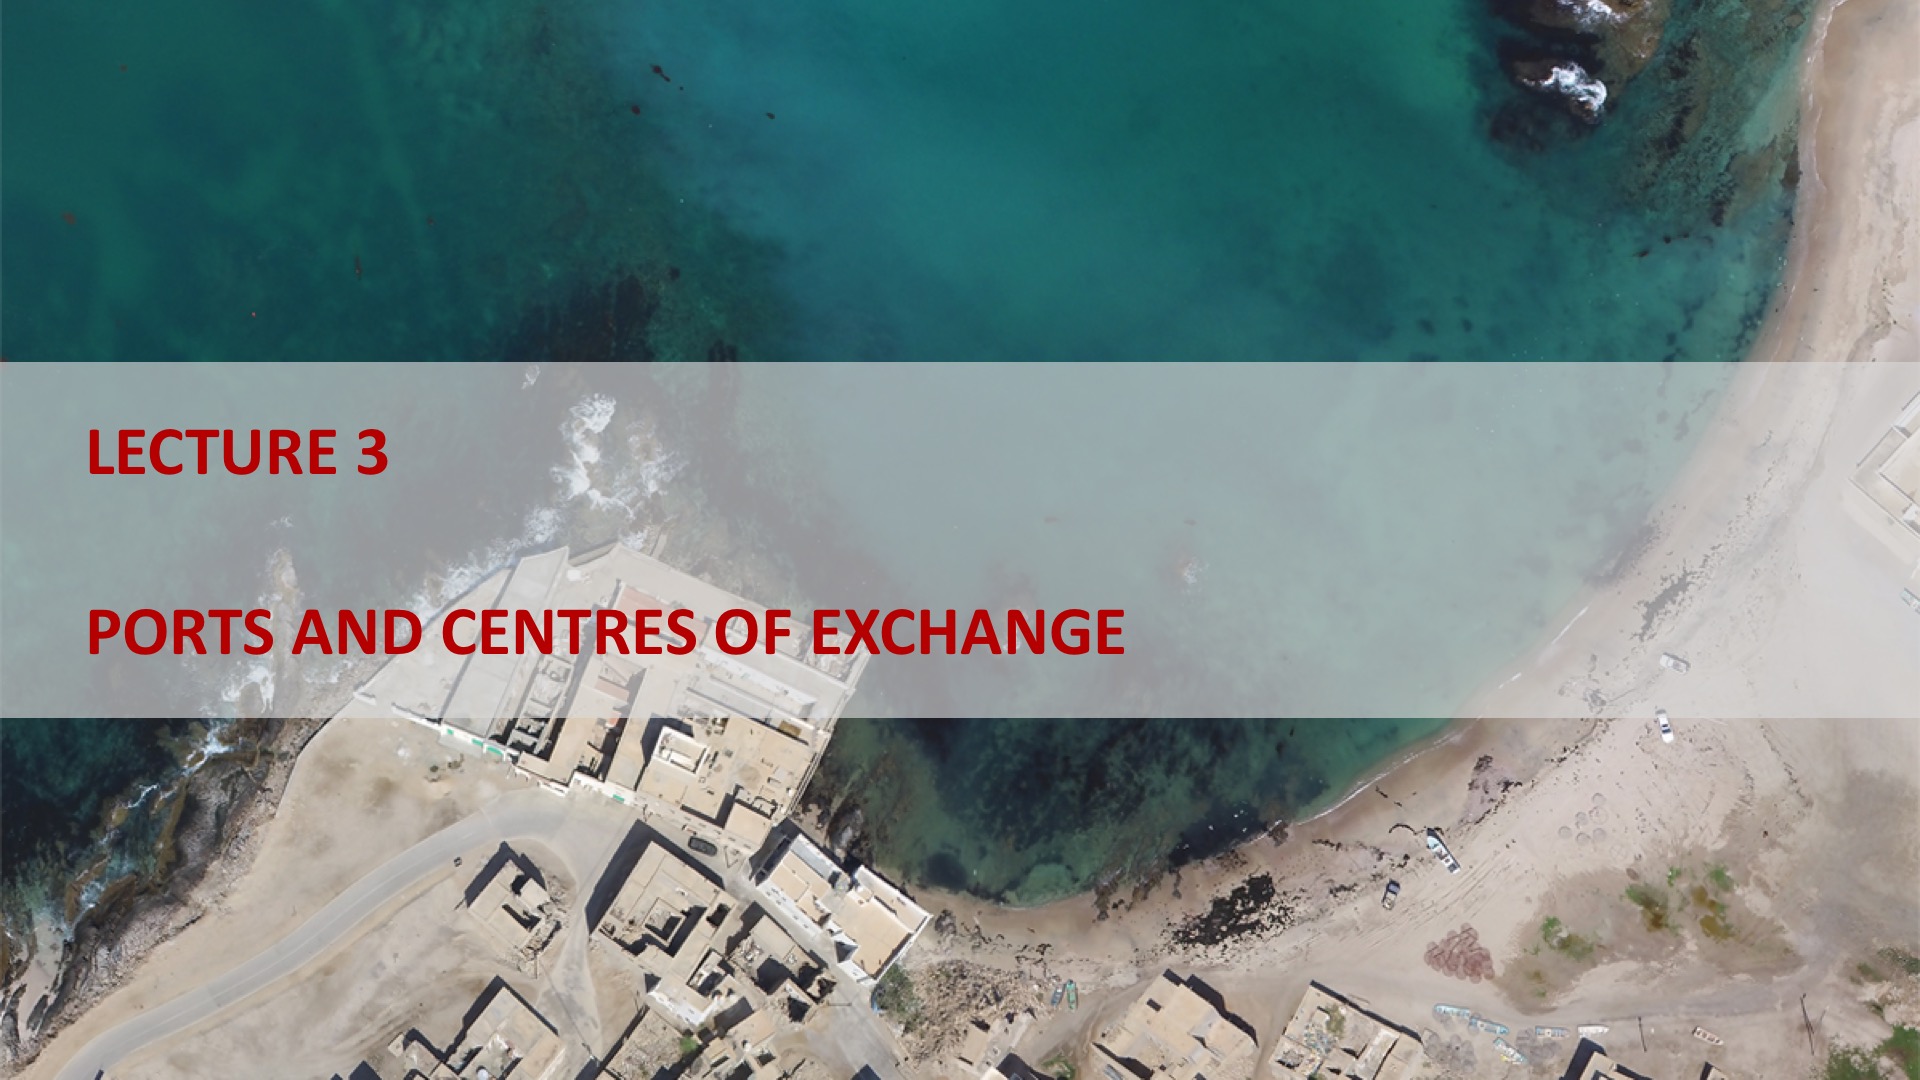 Lecture 3: Ports and Centres of Exchange